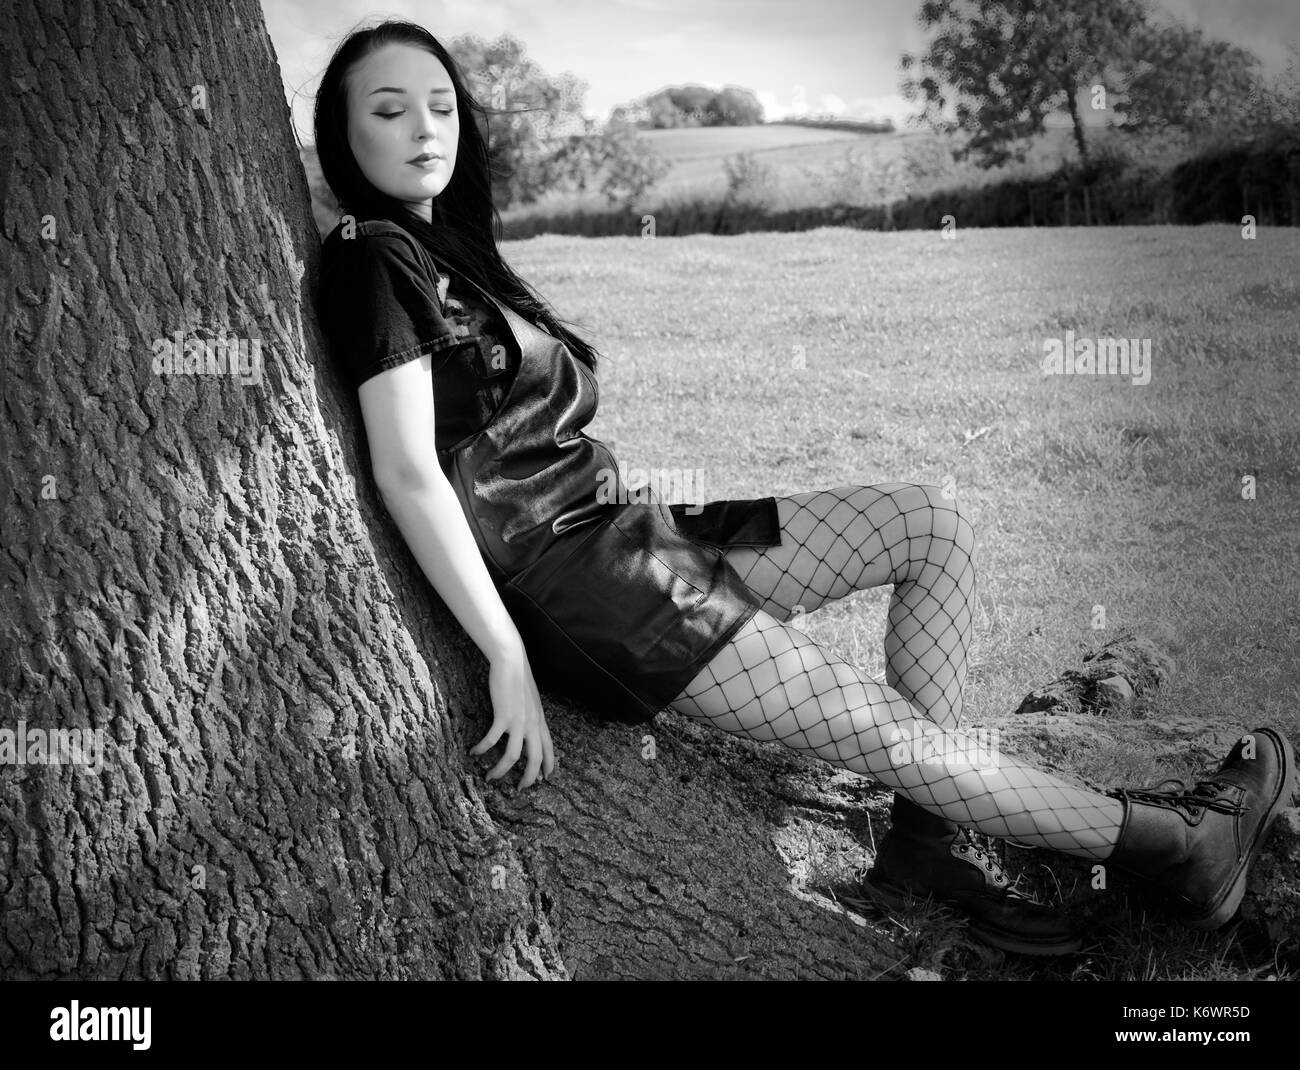 Indian teen girl model Black and White Stock Photos & Images - Alamy